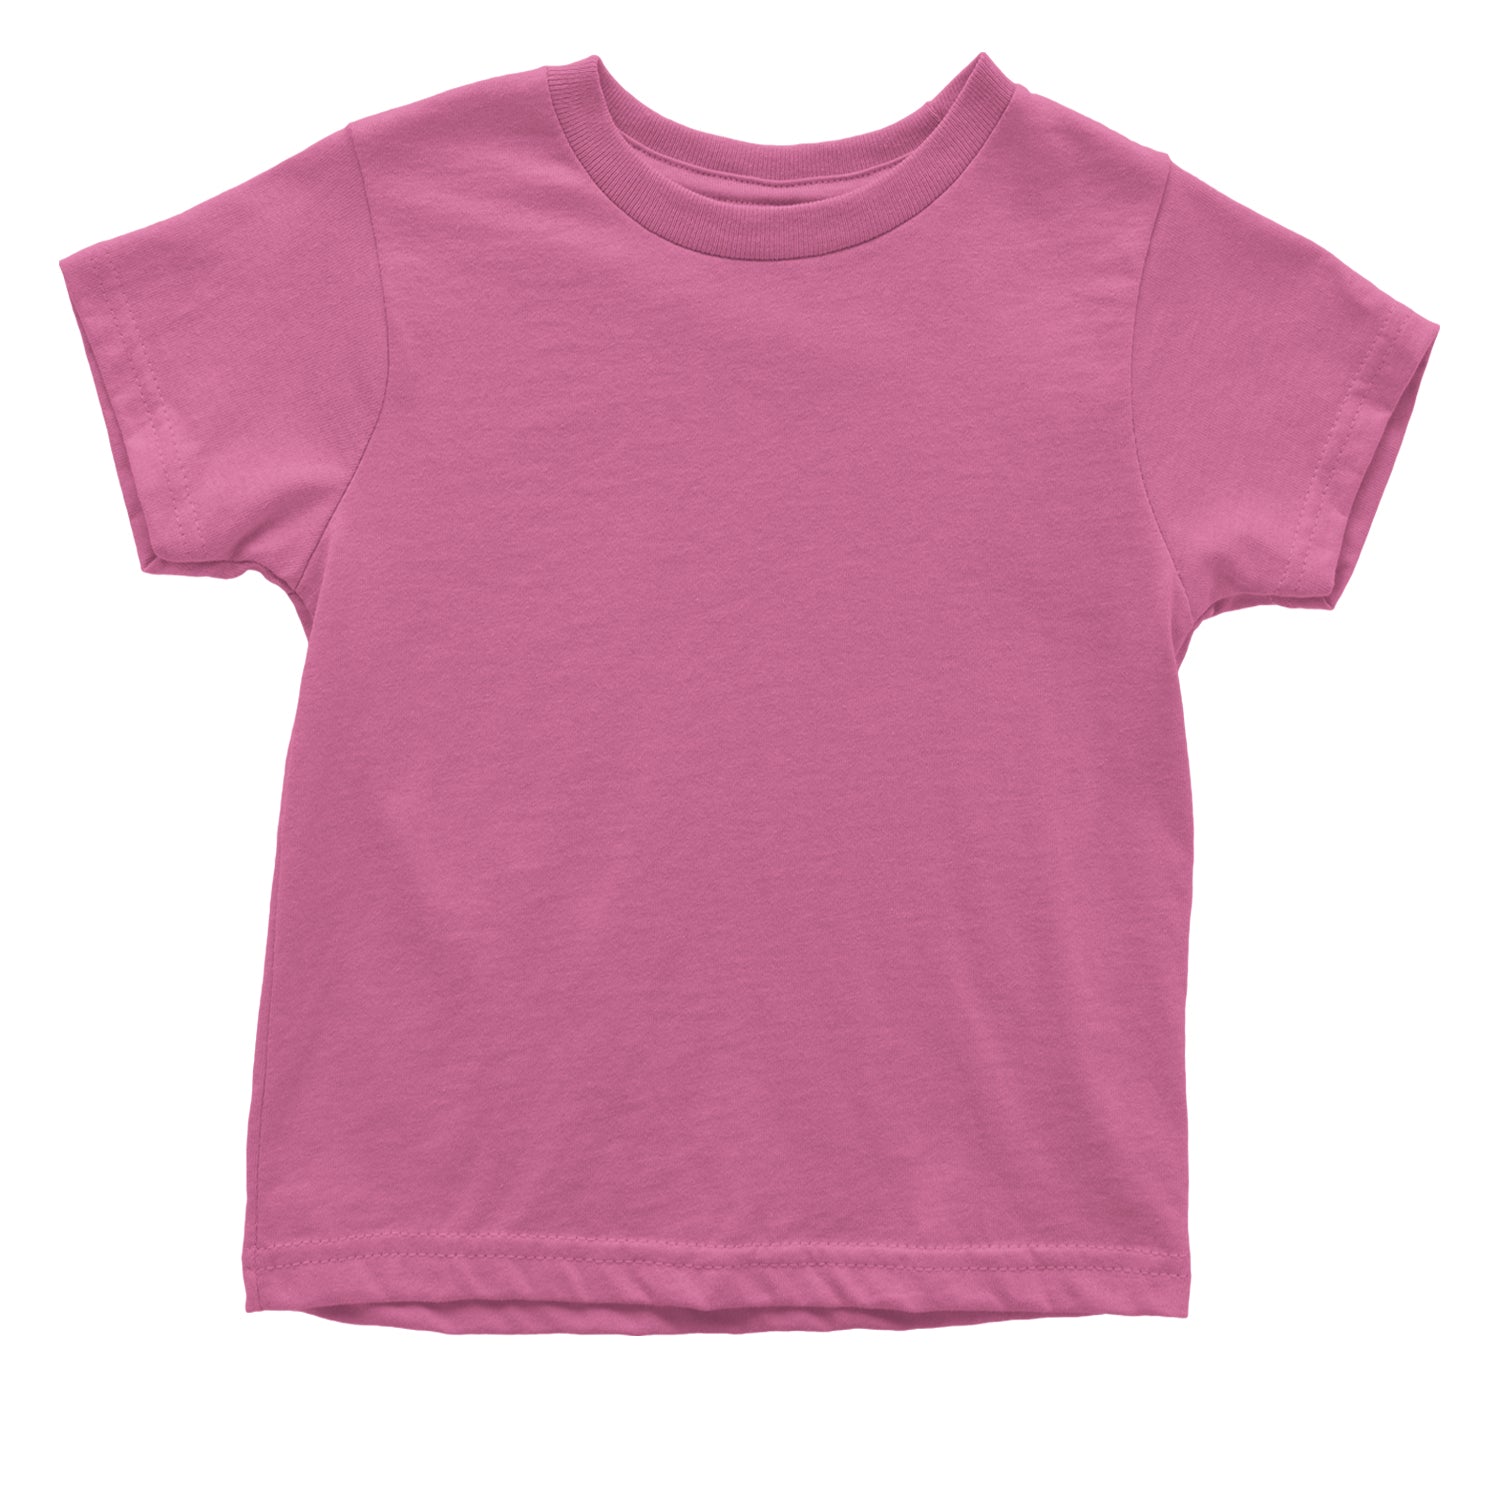 Custom Toddler T-shirts create your own, custom, CustomClothing, customized, personalized by Expression Tees